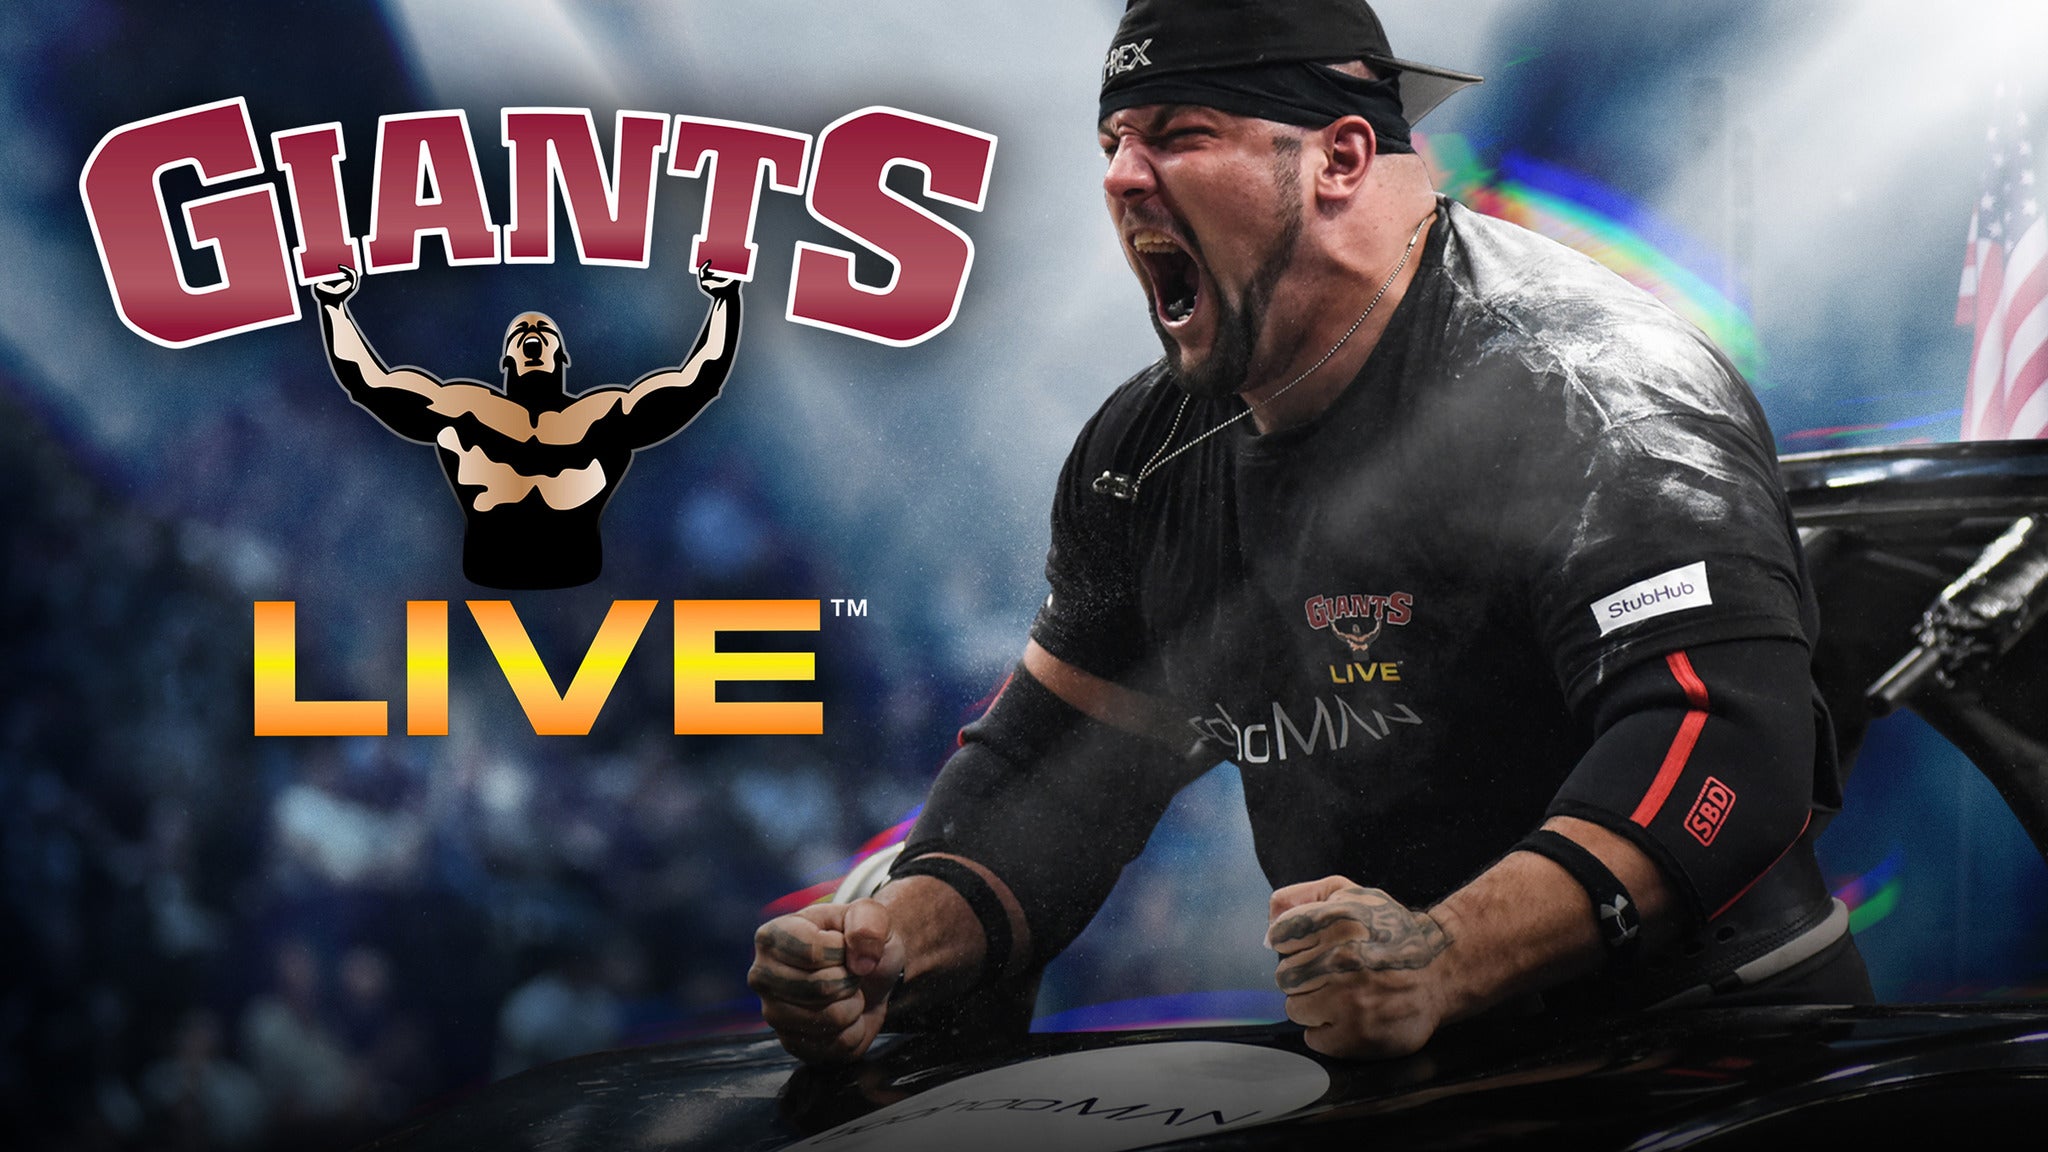 Giants Live Tickets | Single Game Tickets & Schedule | Ticketmaster.com